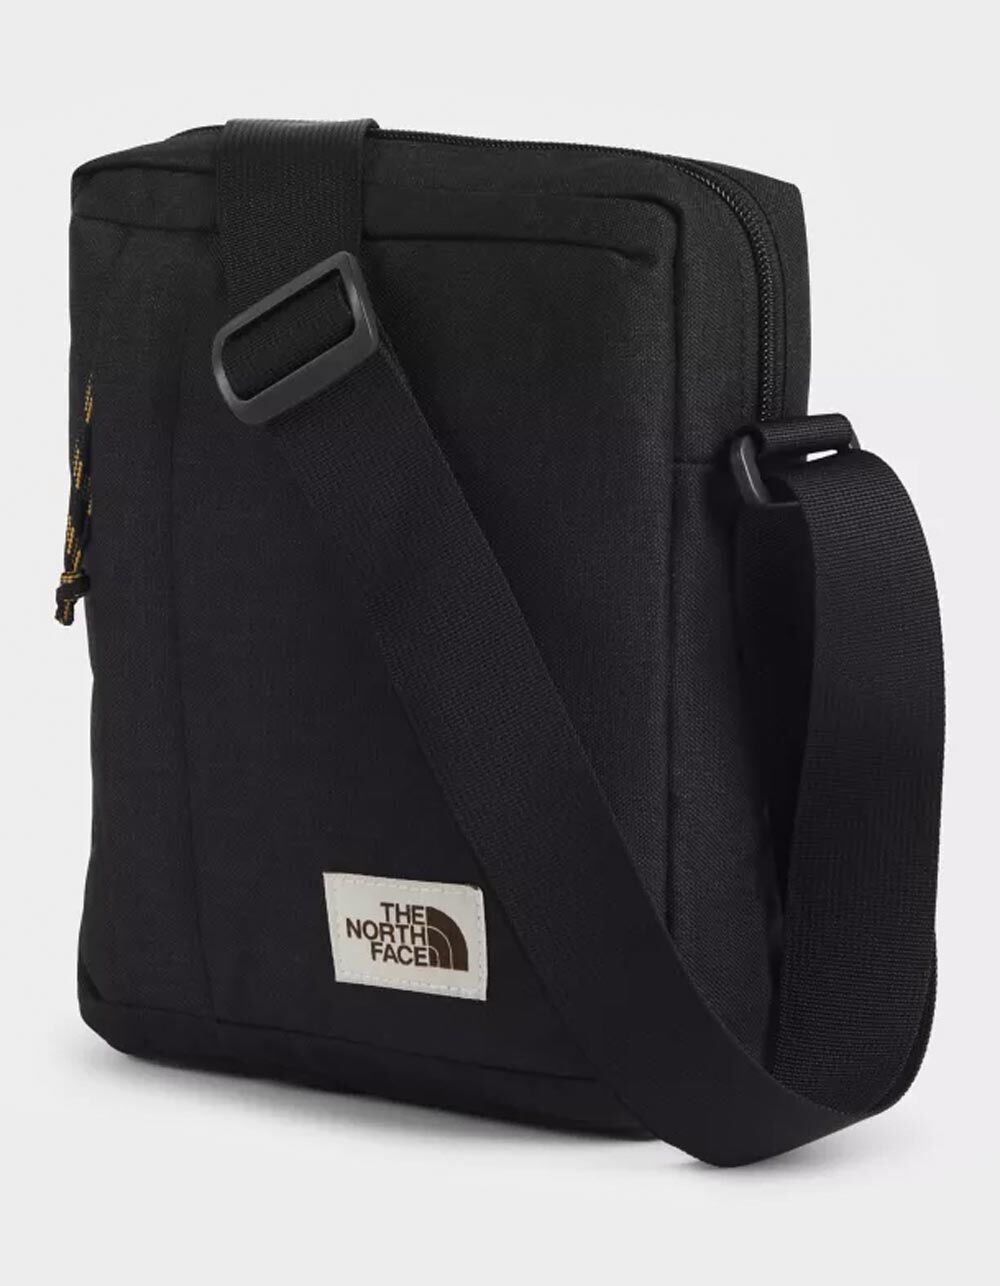 THE NORTH FACE Crossbody Bag image number 3